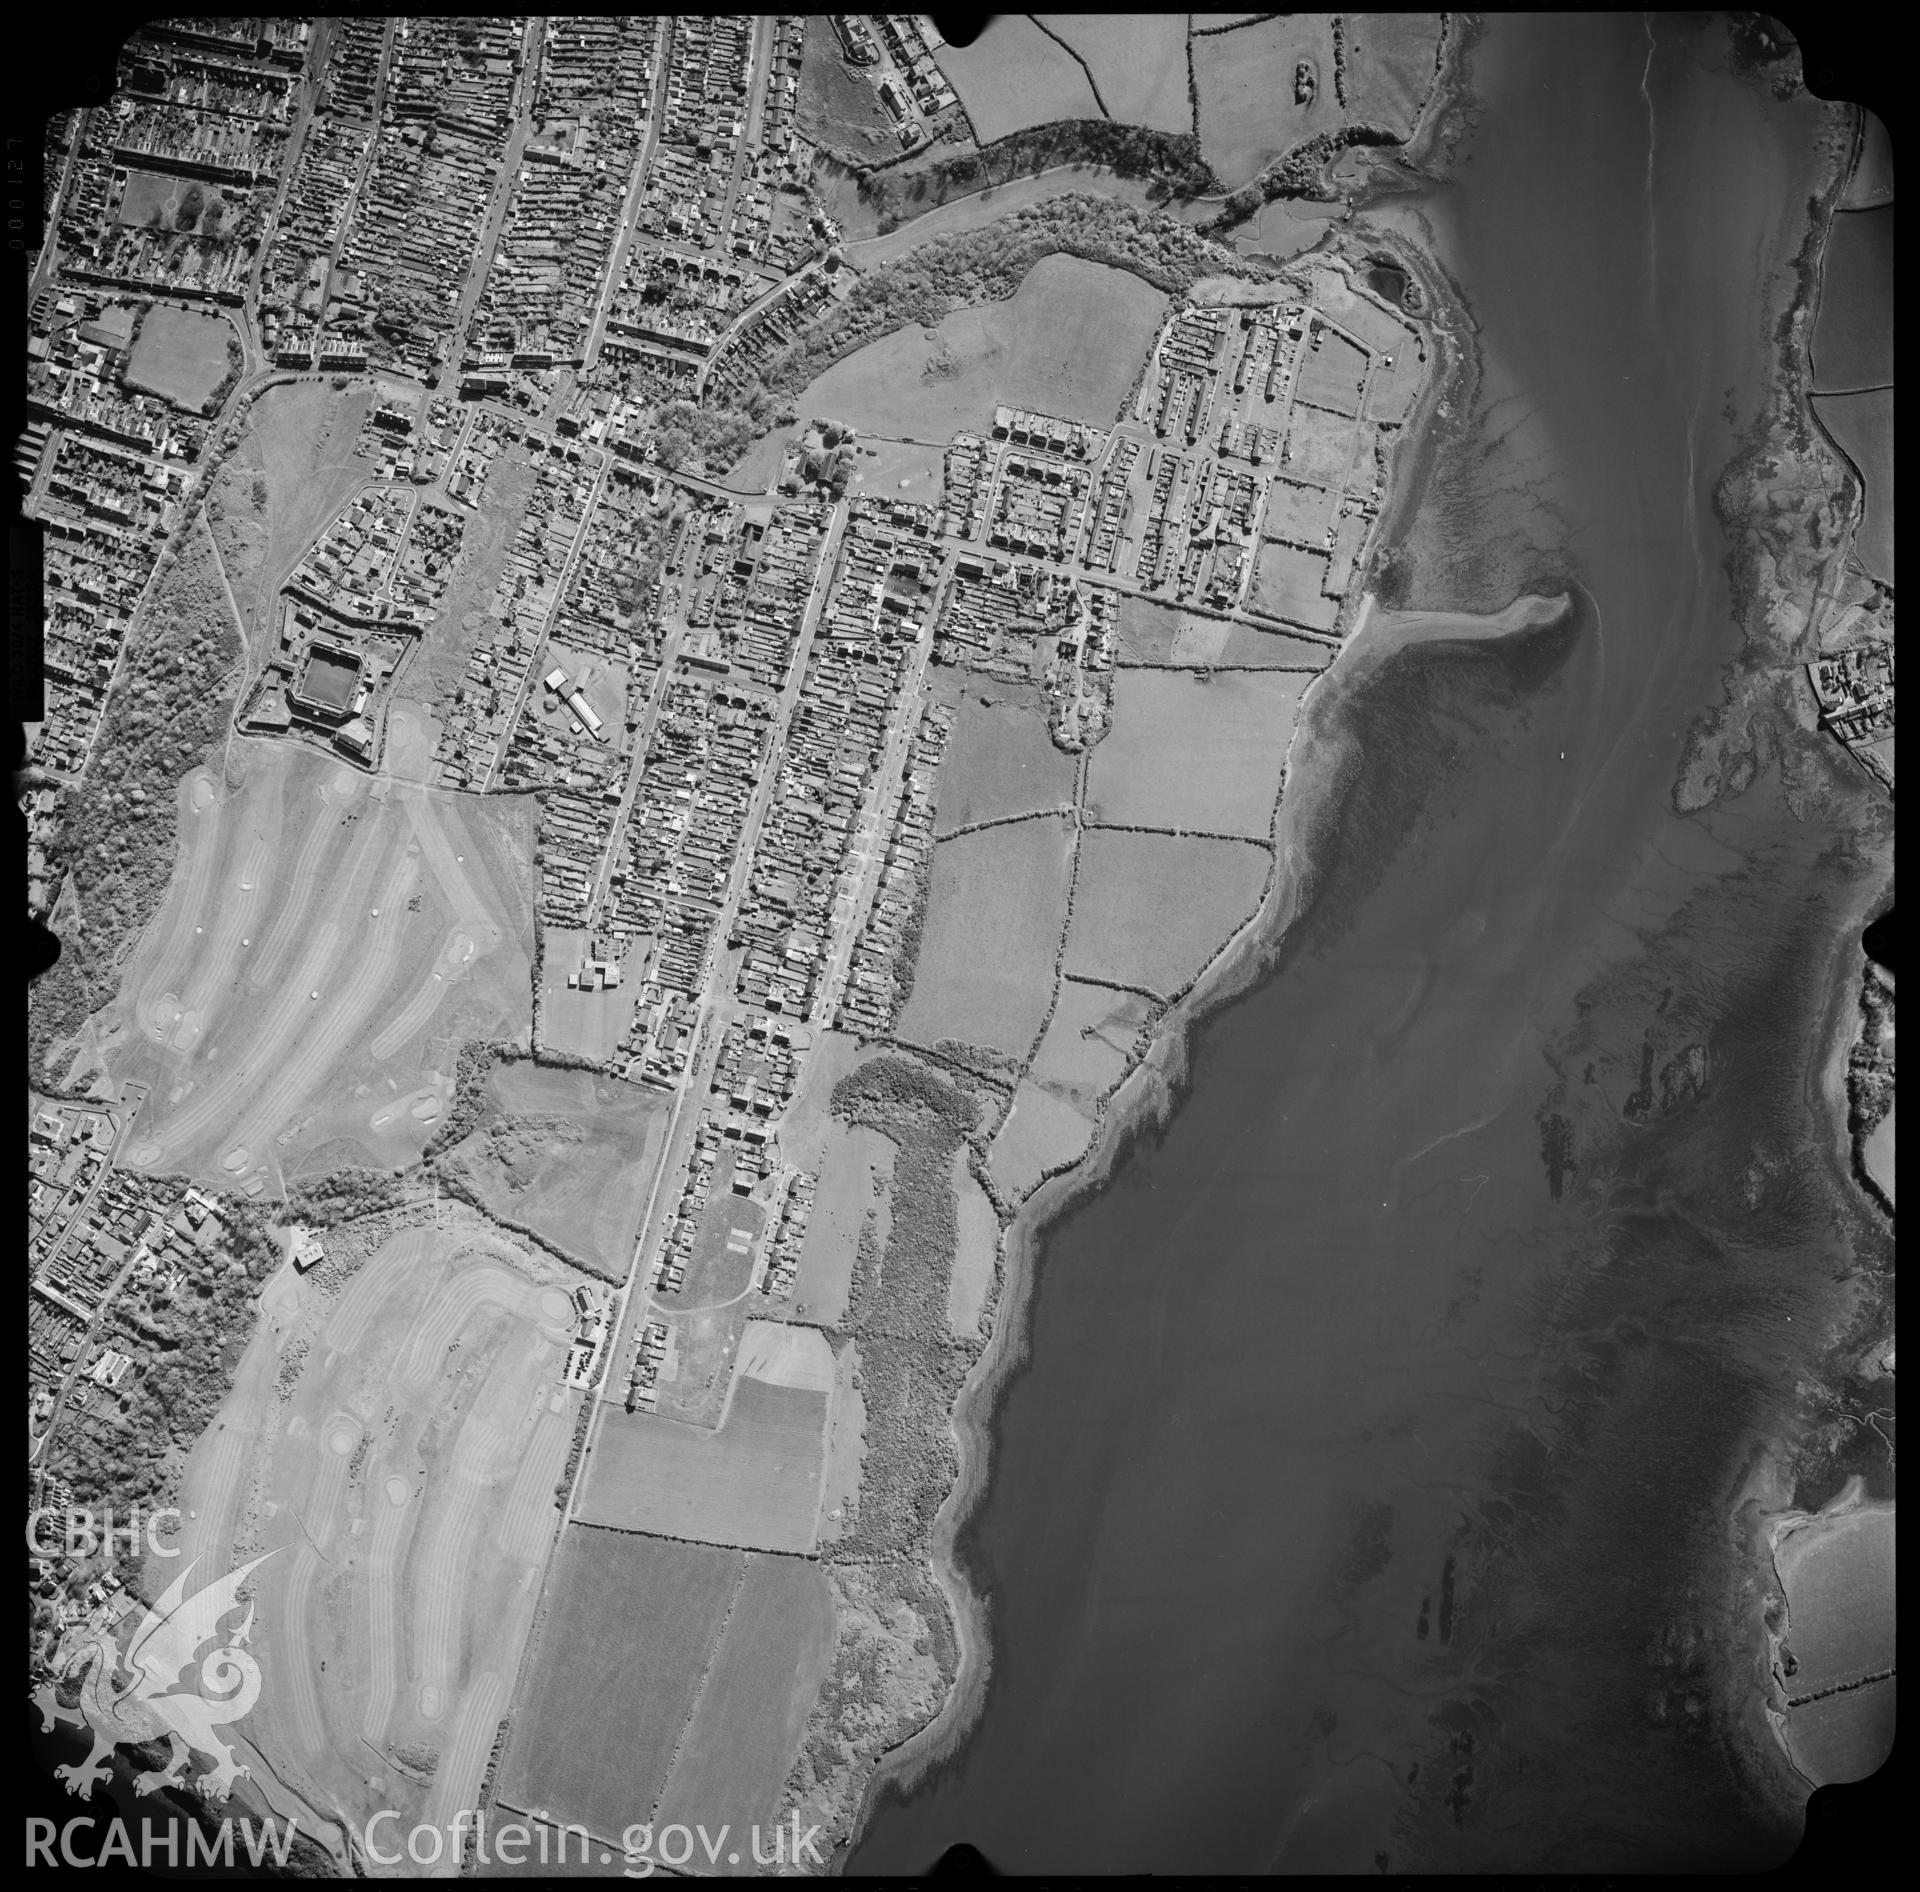 Digitized copy of an aerial photograph showing Milford Haven, taken by Ordnance Survey, 8th August 2001.